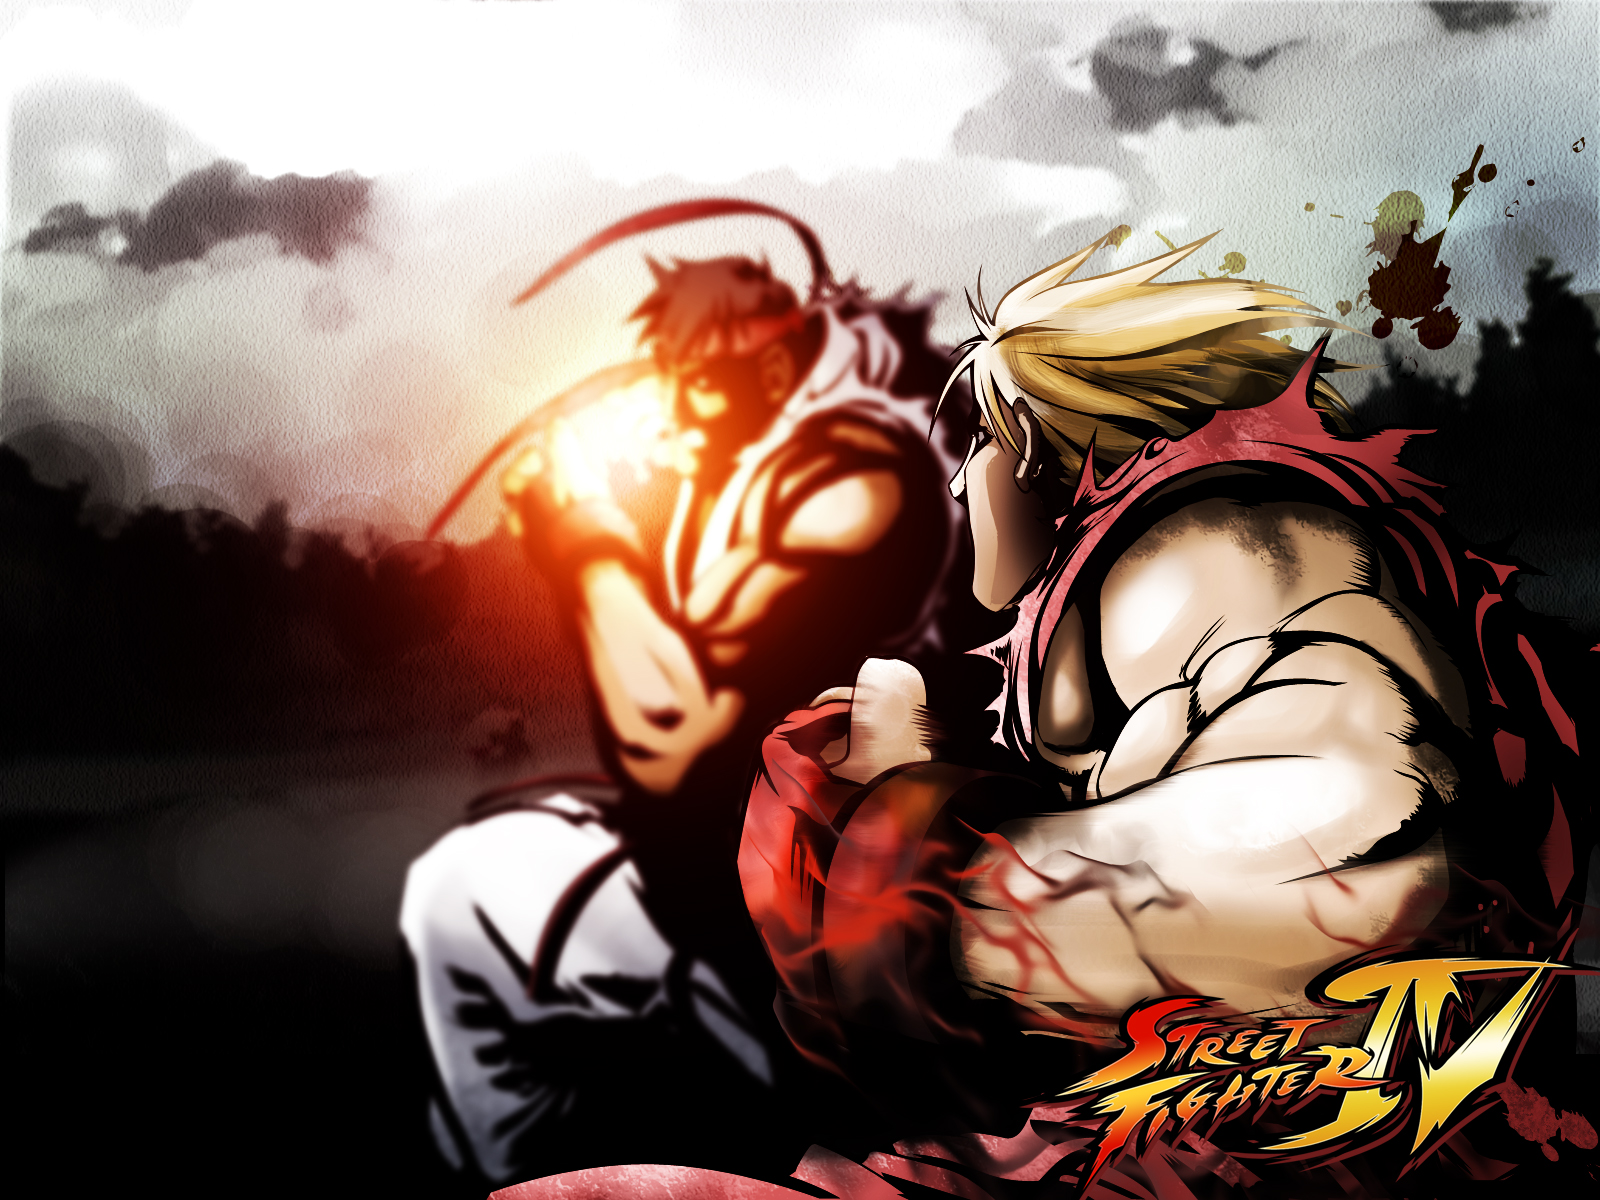 Super street fighter 4 free download xbox